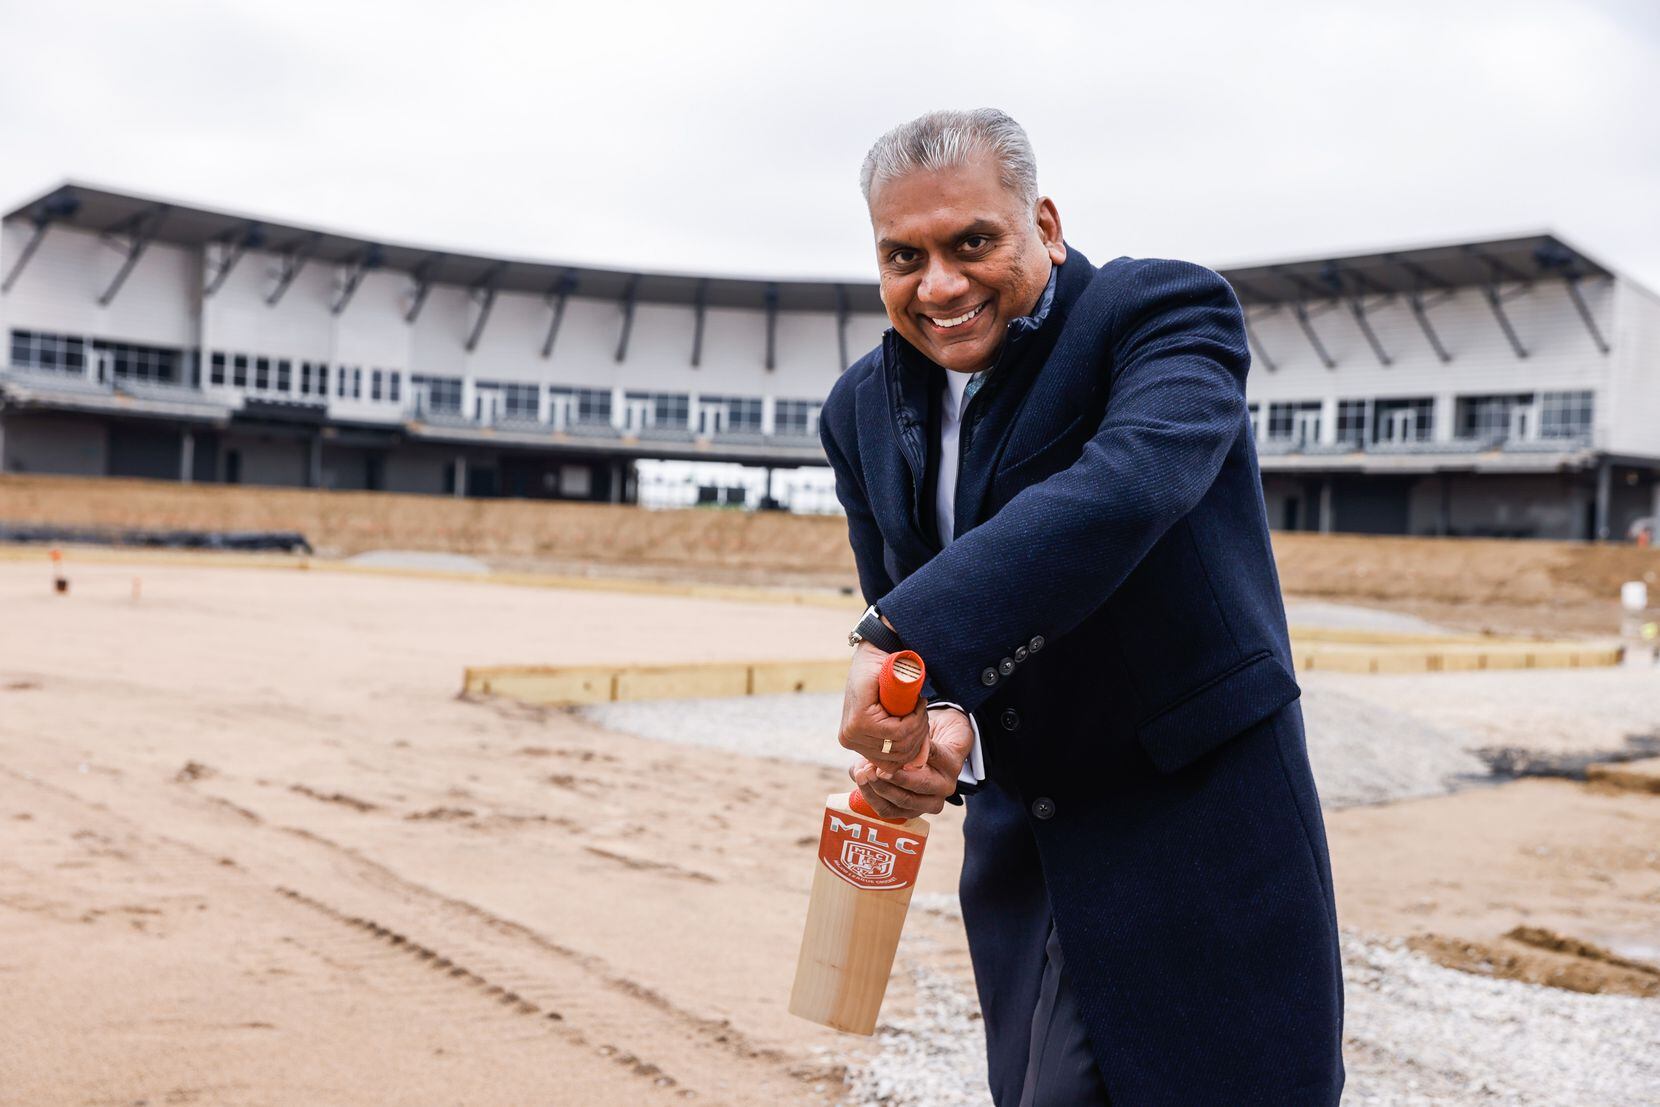 Dallas investor Anurag Jain is one of the early backers of Major League Cricket, along with...